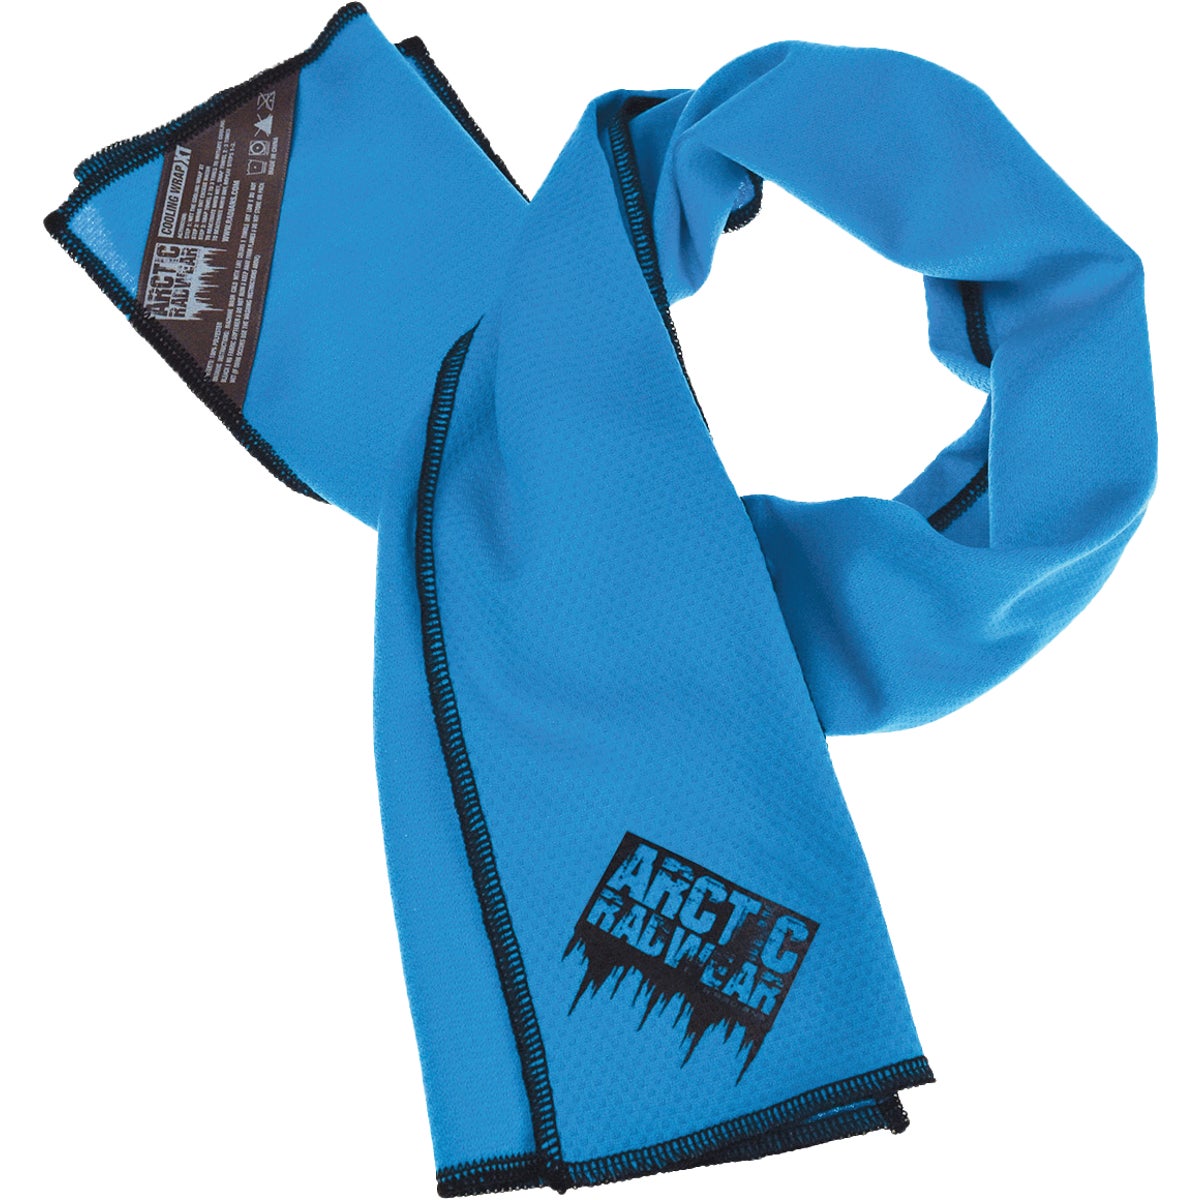 Item 700546, Arctic Radwear cooling wrap made with Advanced Arctic Technology that 